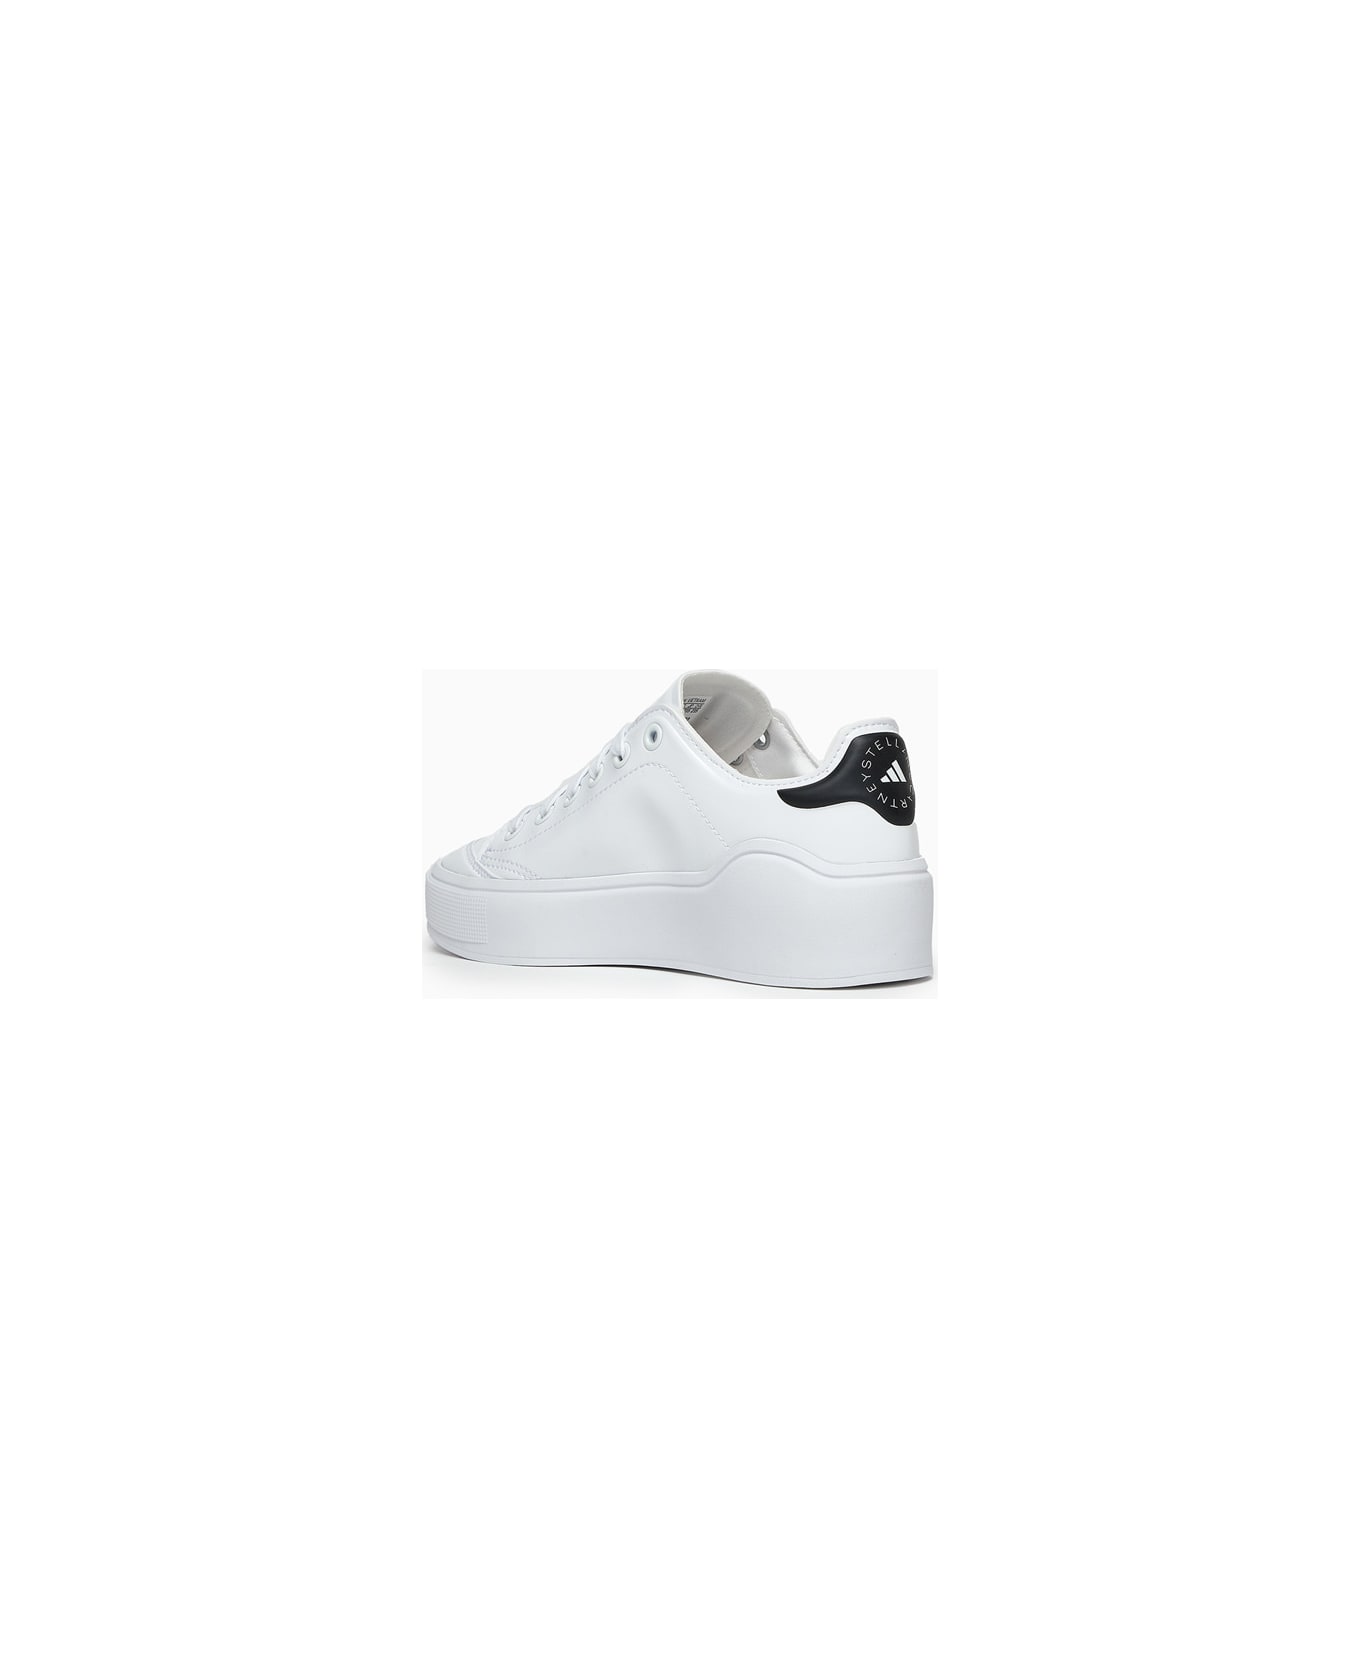 Adidas by Stella McCartney Court Bio Synth Sneakers Hq1056 - White